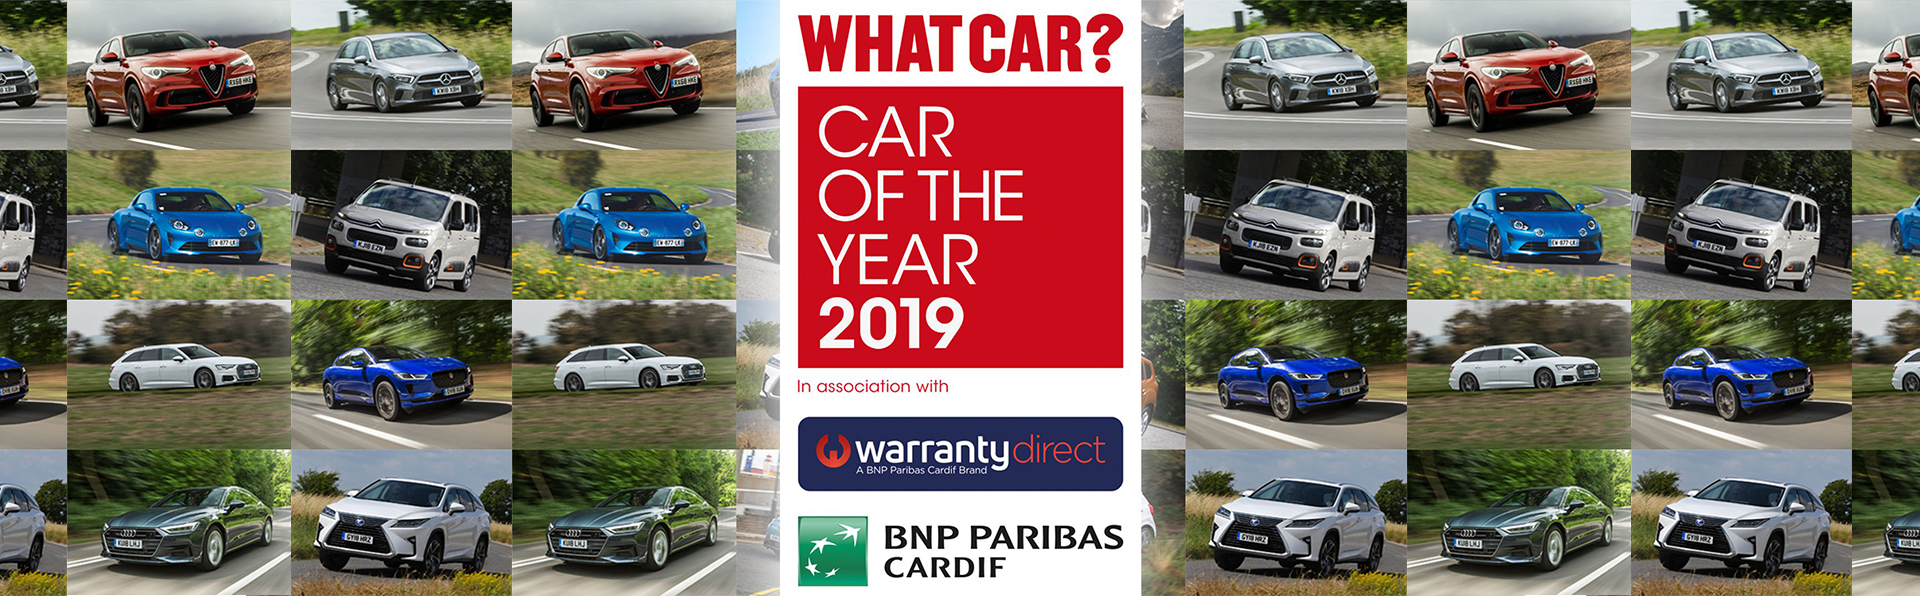 What Car? Car of the Year Awards